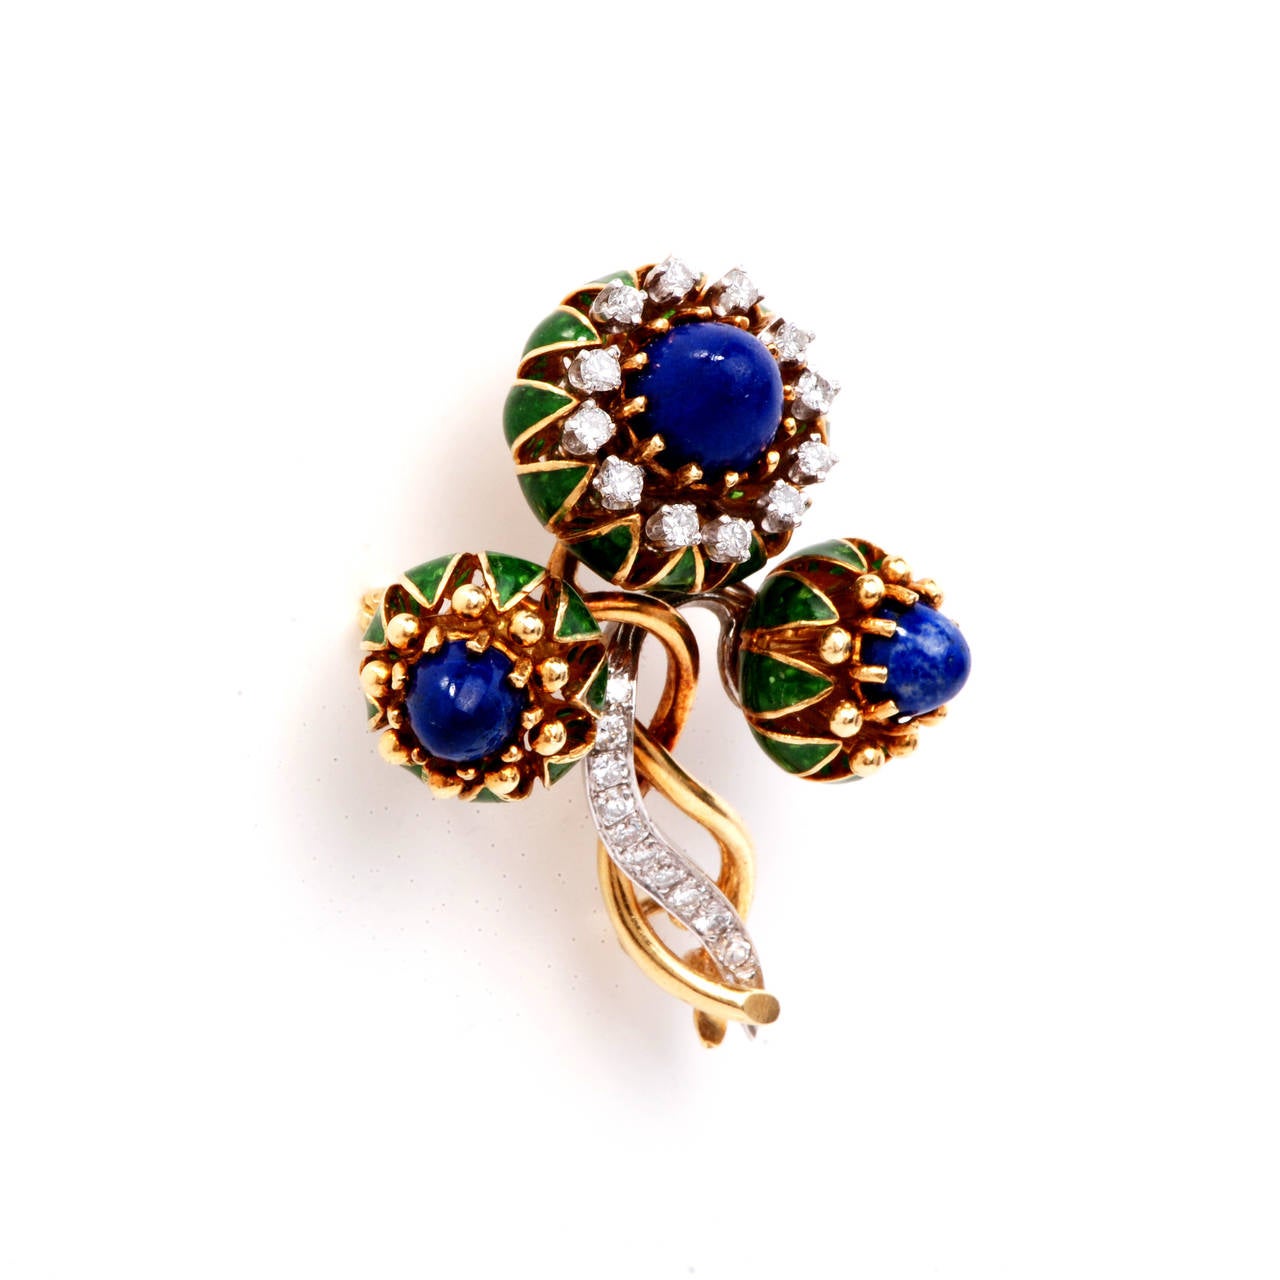 This stunning genuine Le Triomphe brooch pin is handcrafted in solid 18K yellow gold and plat . The sweet pin displays 3 genuine dome sugar- loaf lapis approx 10.00cttw and accented with 22 genuine round cut diamonds of approx 0.75cttw, G color, VS1